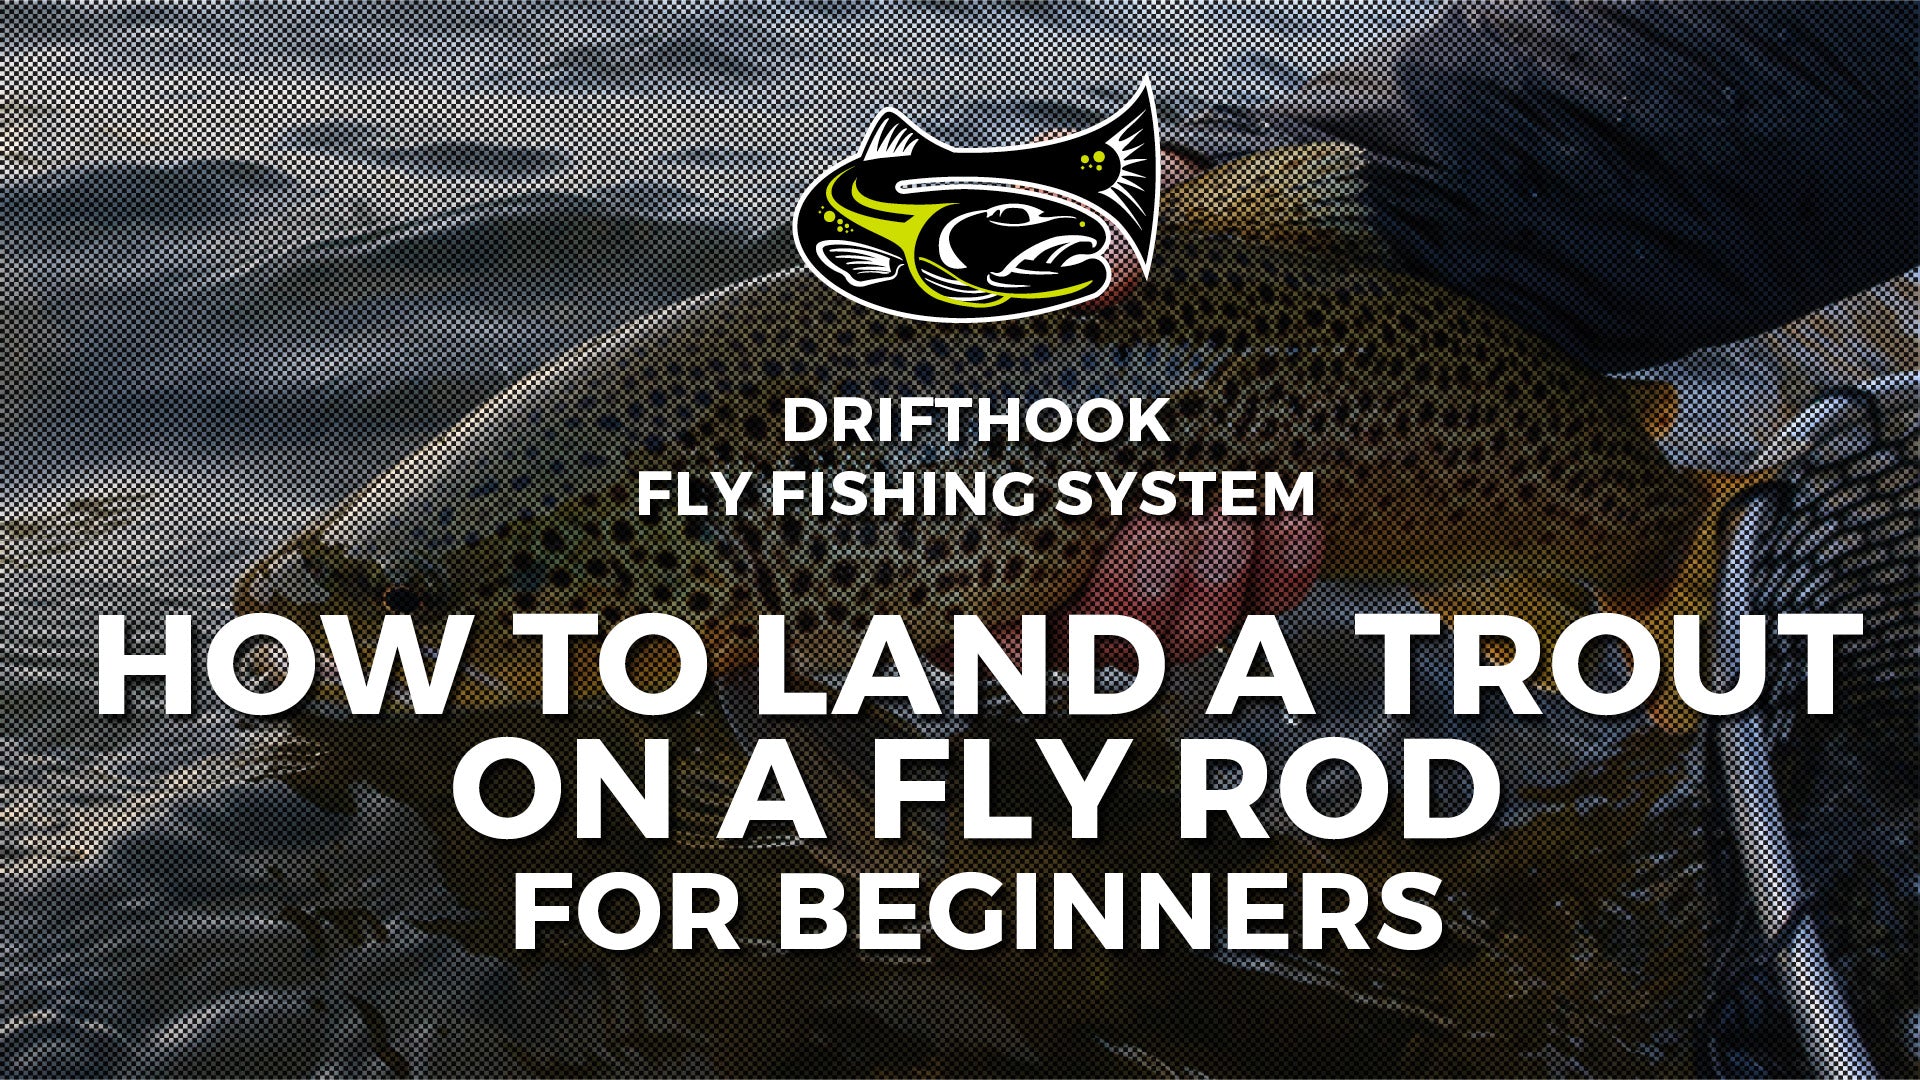 How to Land Trout on a Fly Rod for Beginners